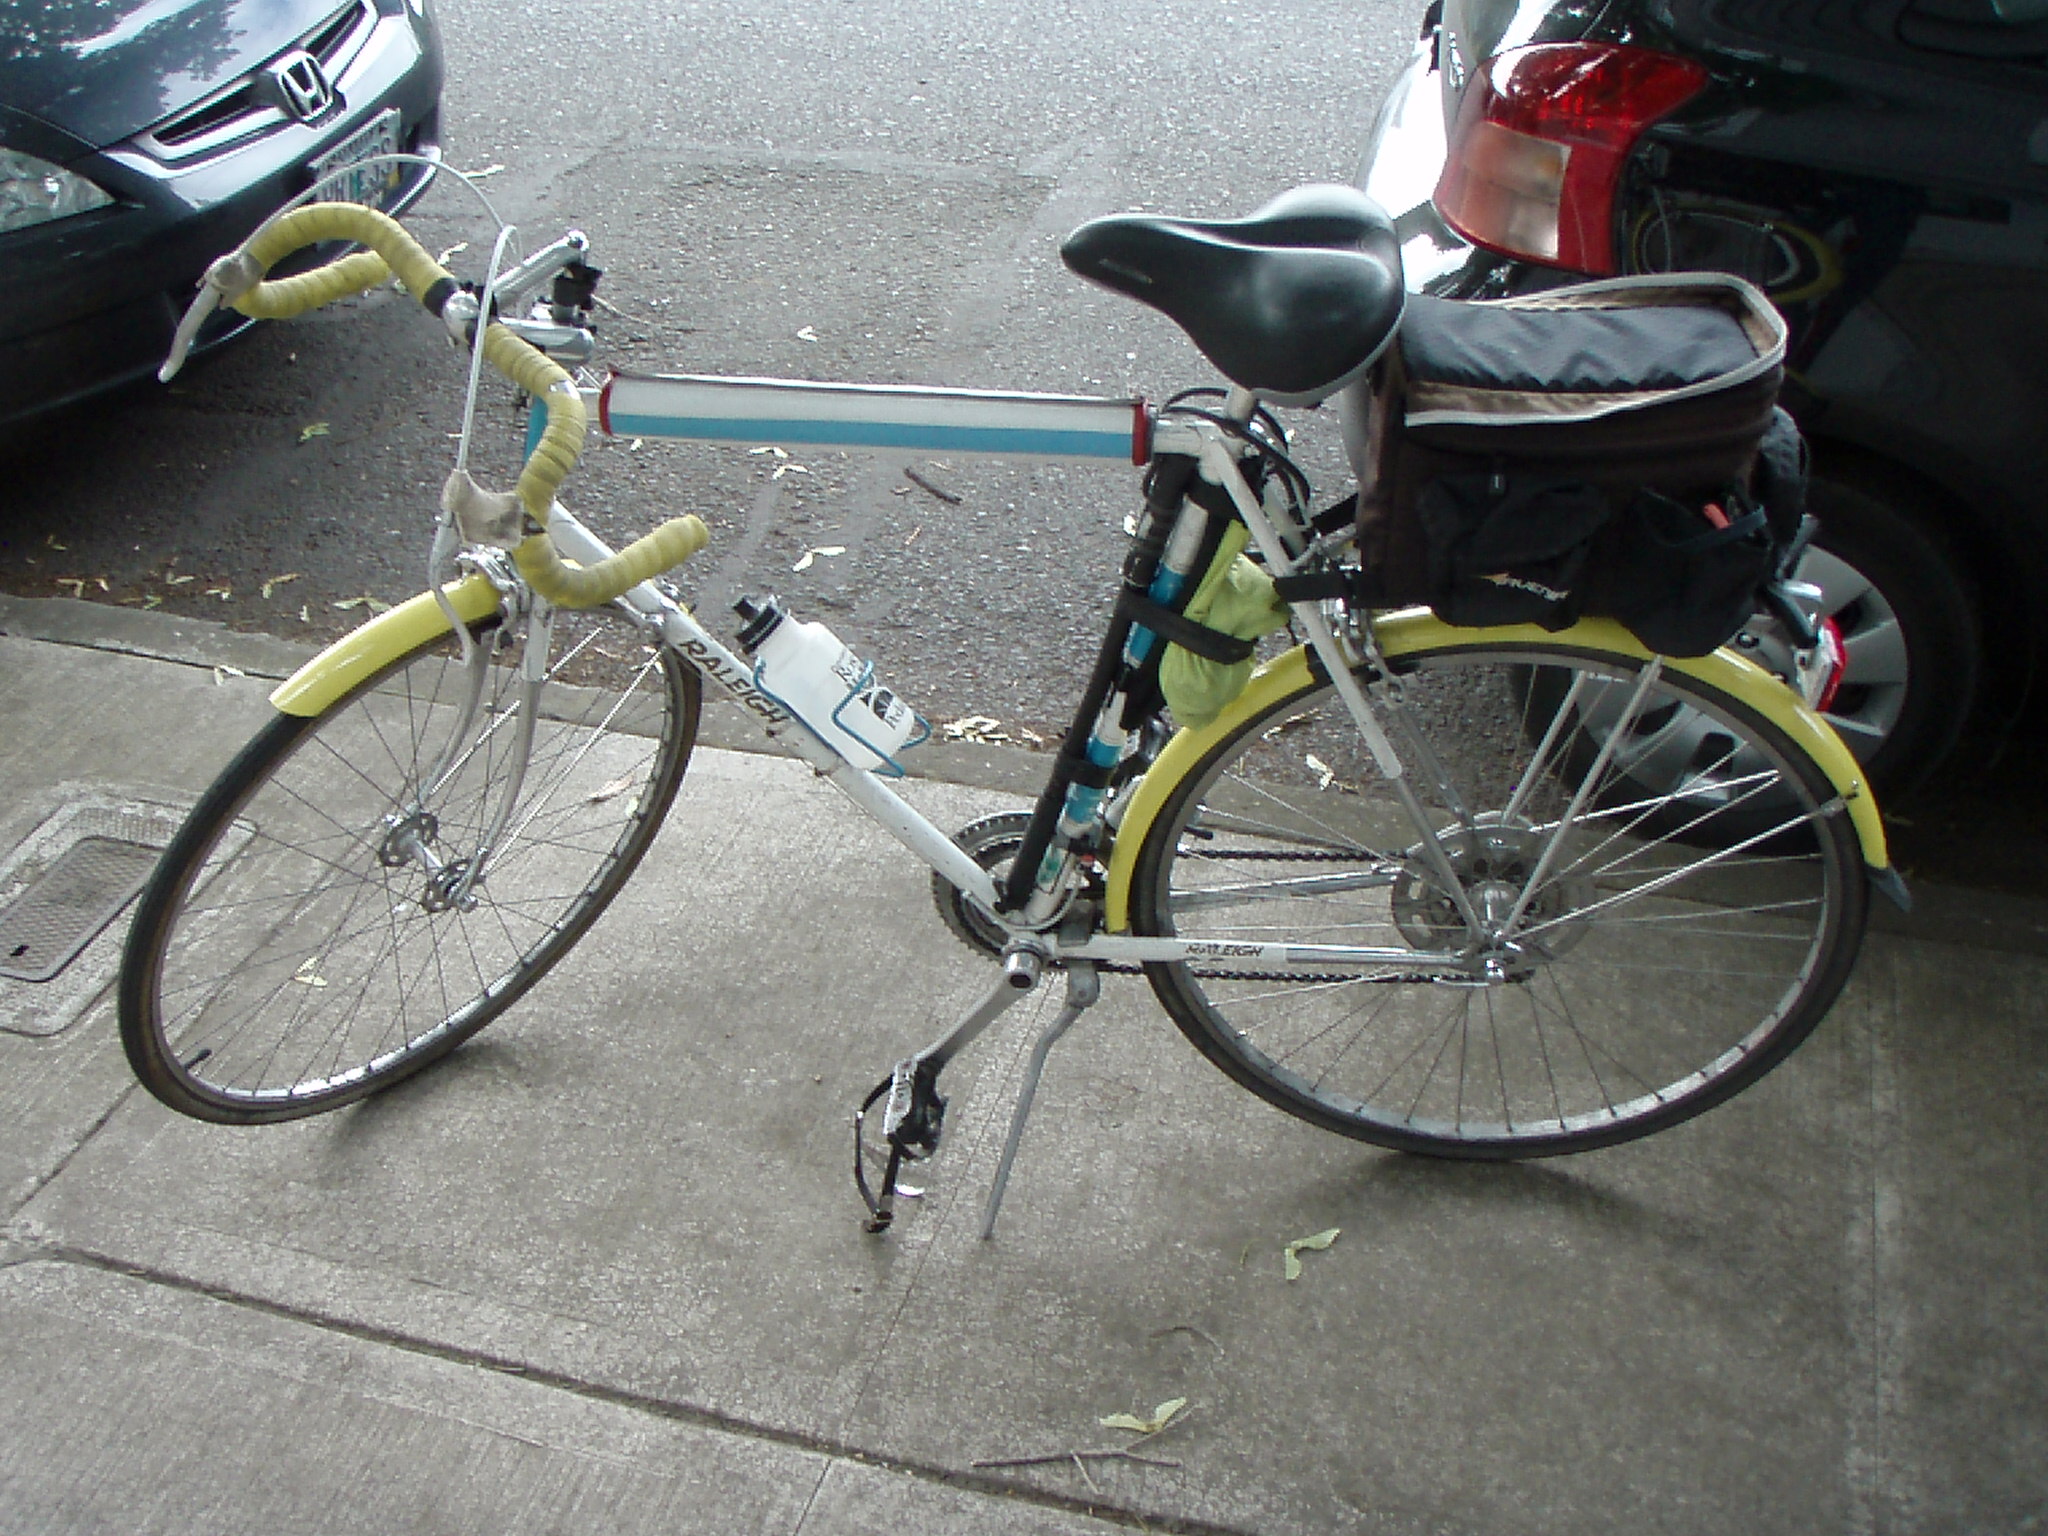 there is a bike parked on the sidewalk